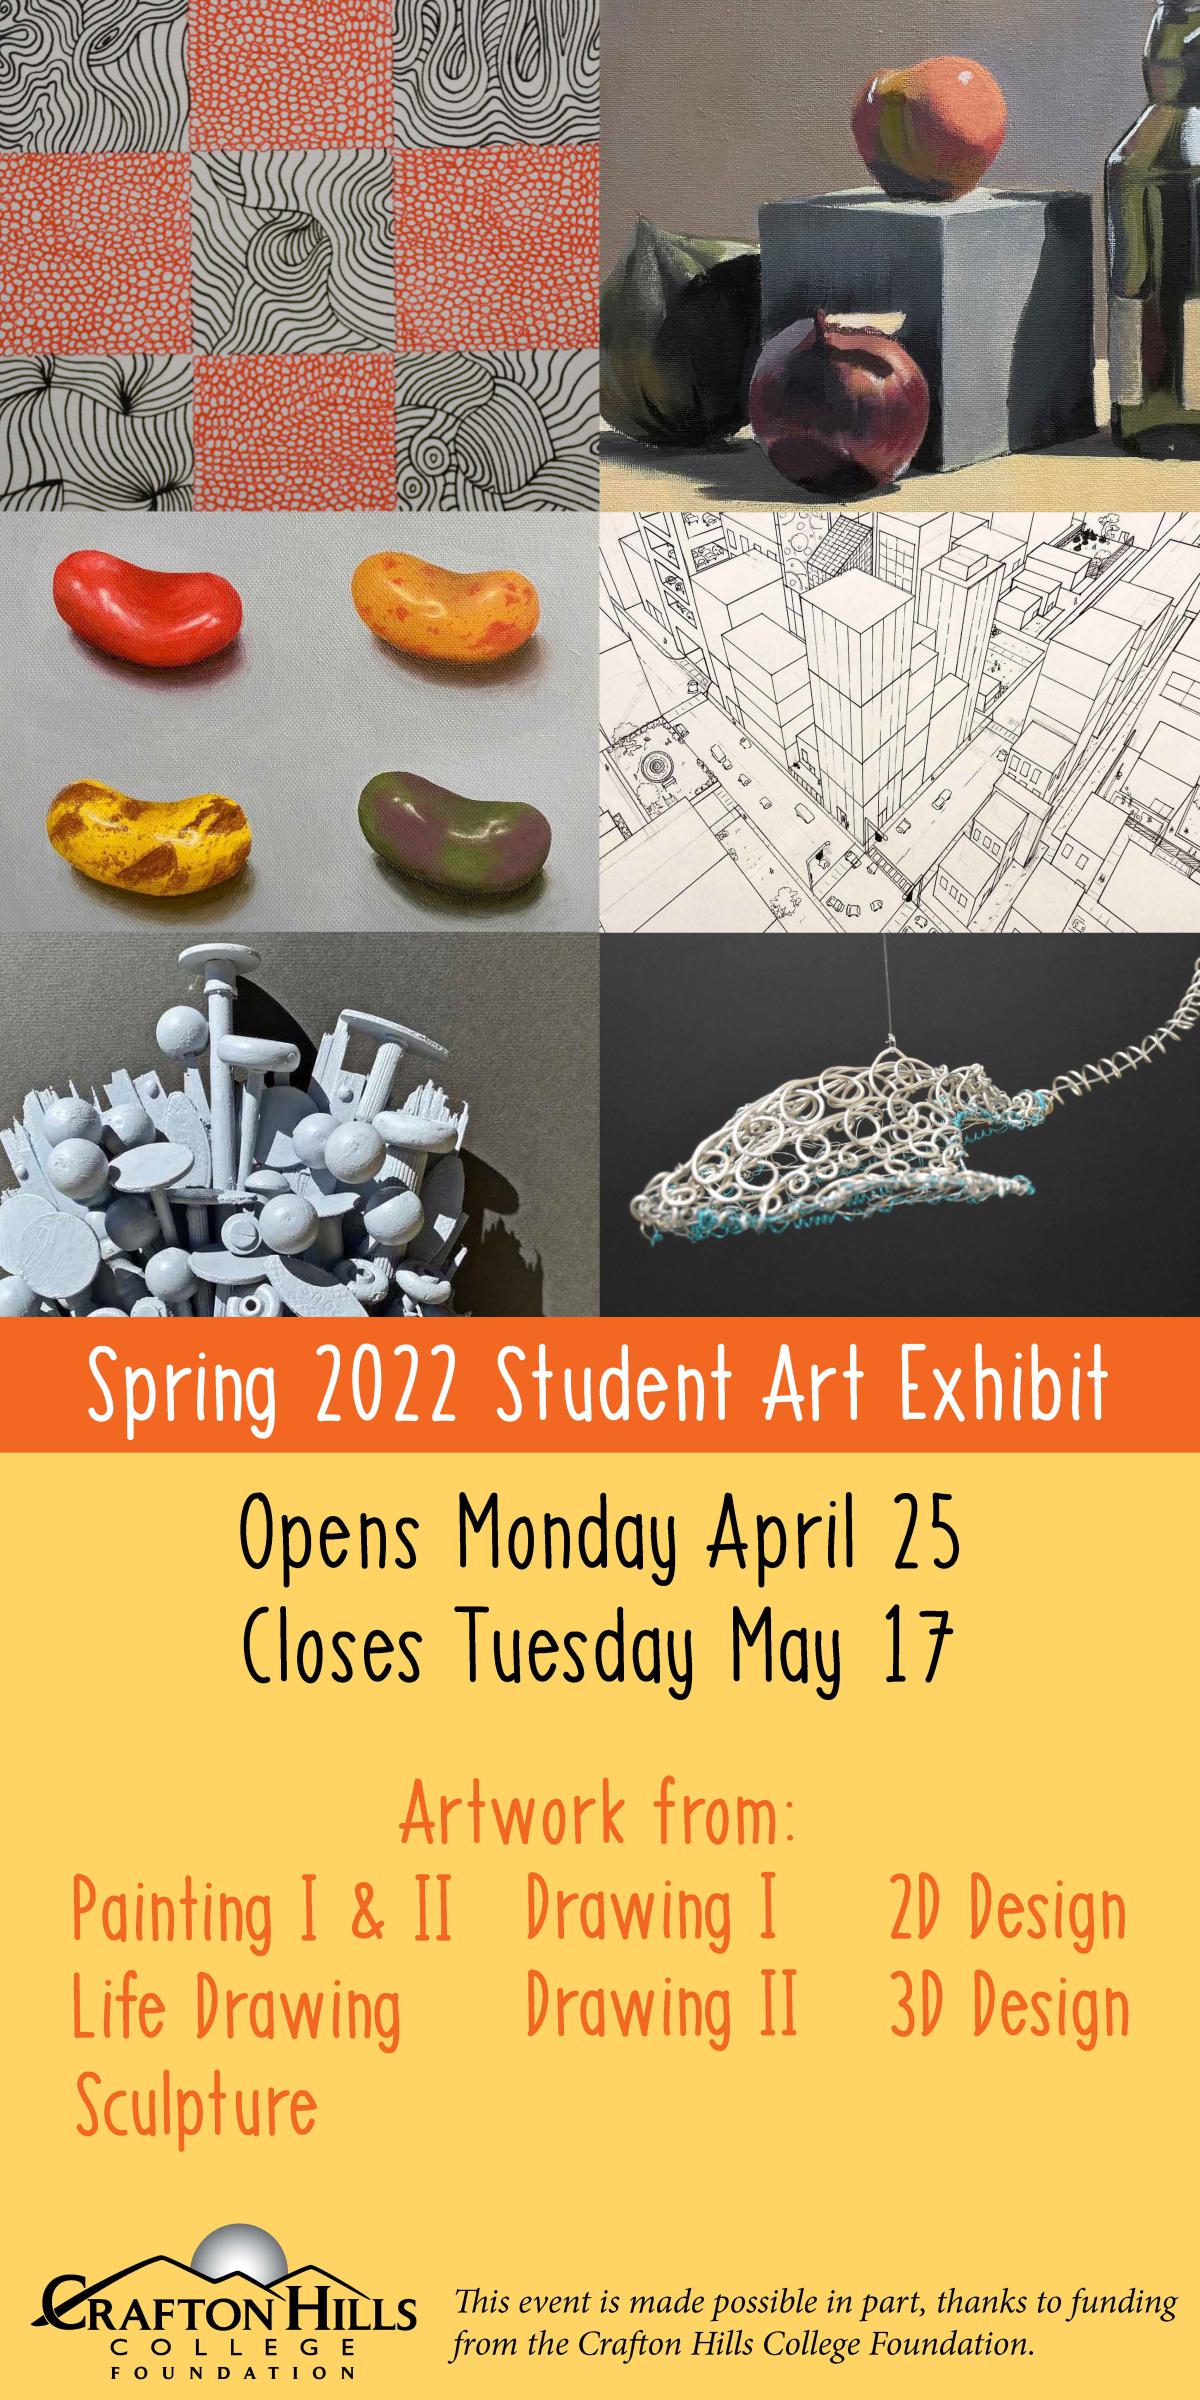 Spring 2022 Student Art Exhibit. Opens Monday, April 25. Closes Tuesday, May 17. Artwork from: Painting I & II, Life Drawing, Sculpture, Drawing I, Drawing II, 2D Design, 3D Design. This event is made possible in part, thanks to funding from the Crafton Hills College Foundation.